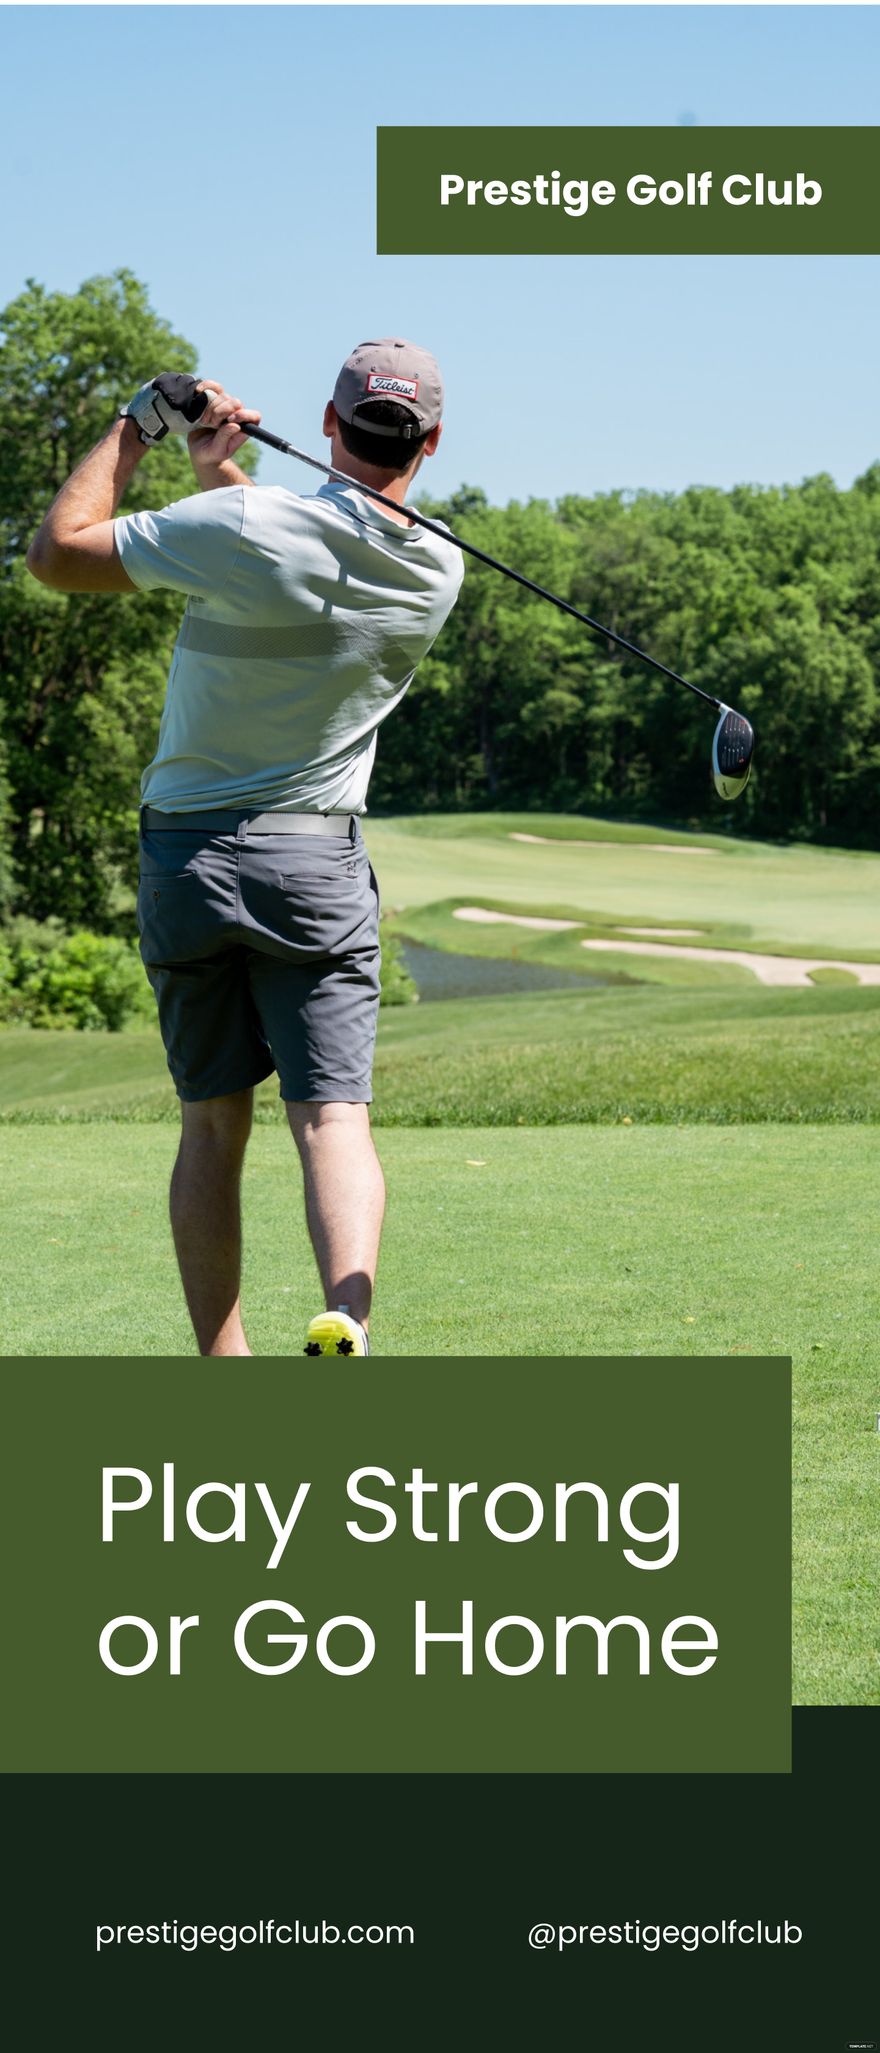 Golf Club Rollup Banner Template in Word, Google Docs, Publisher